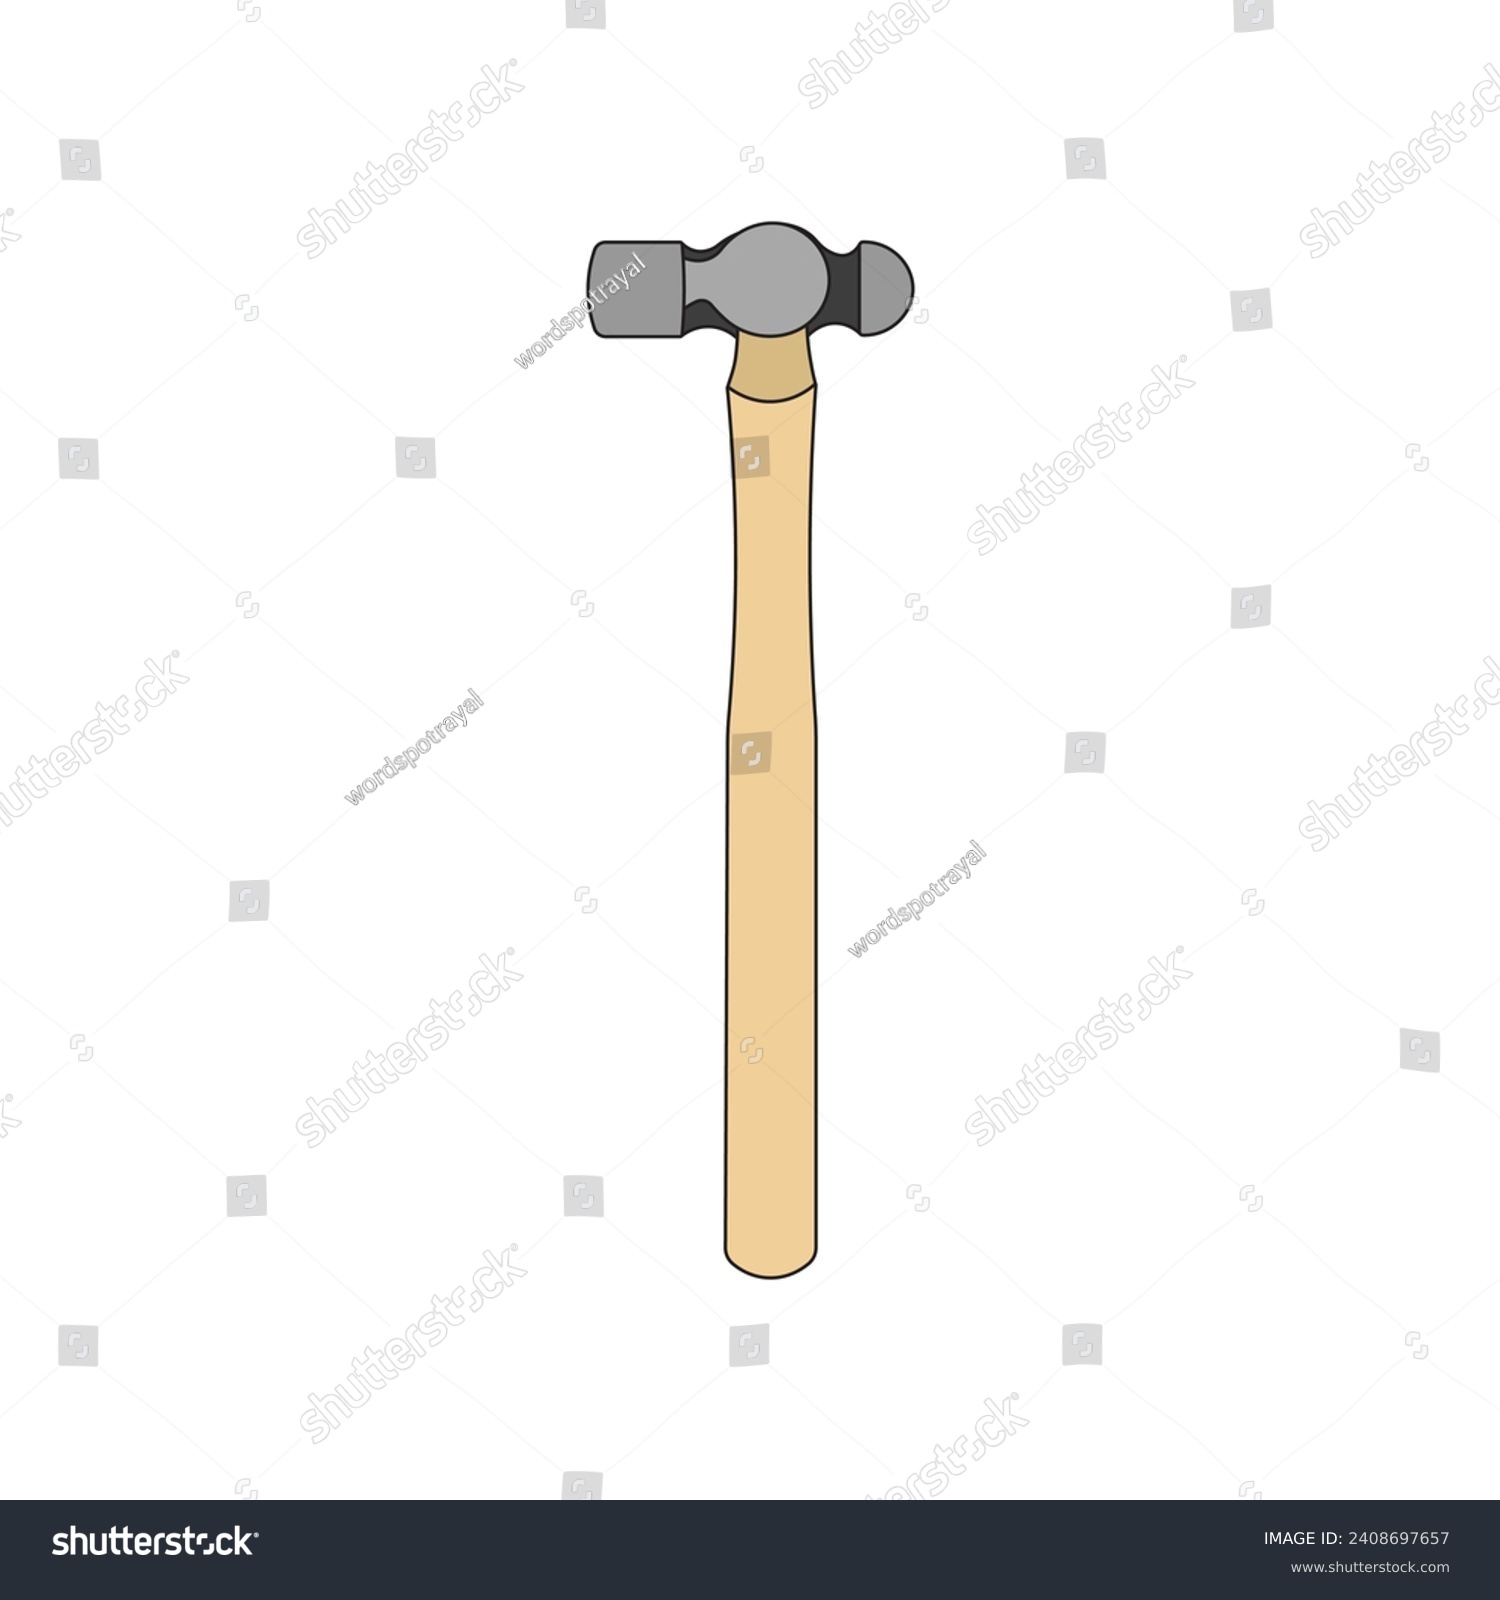 SVG of Kids drawing Cartoon Vector illustration ball peen hammer icon Isolated on White Background svg